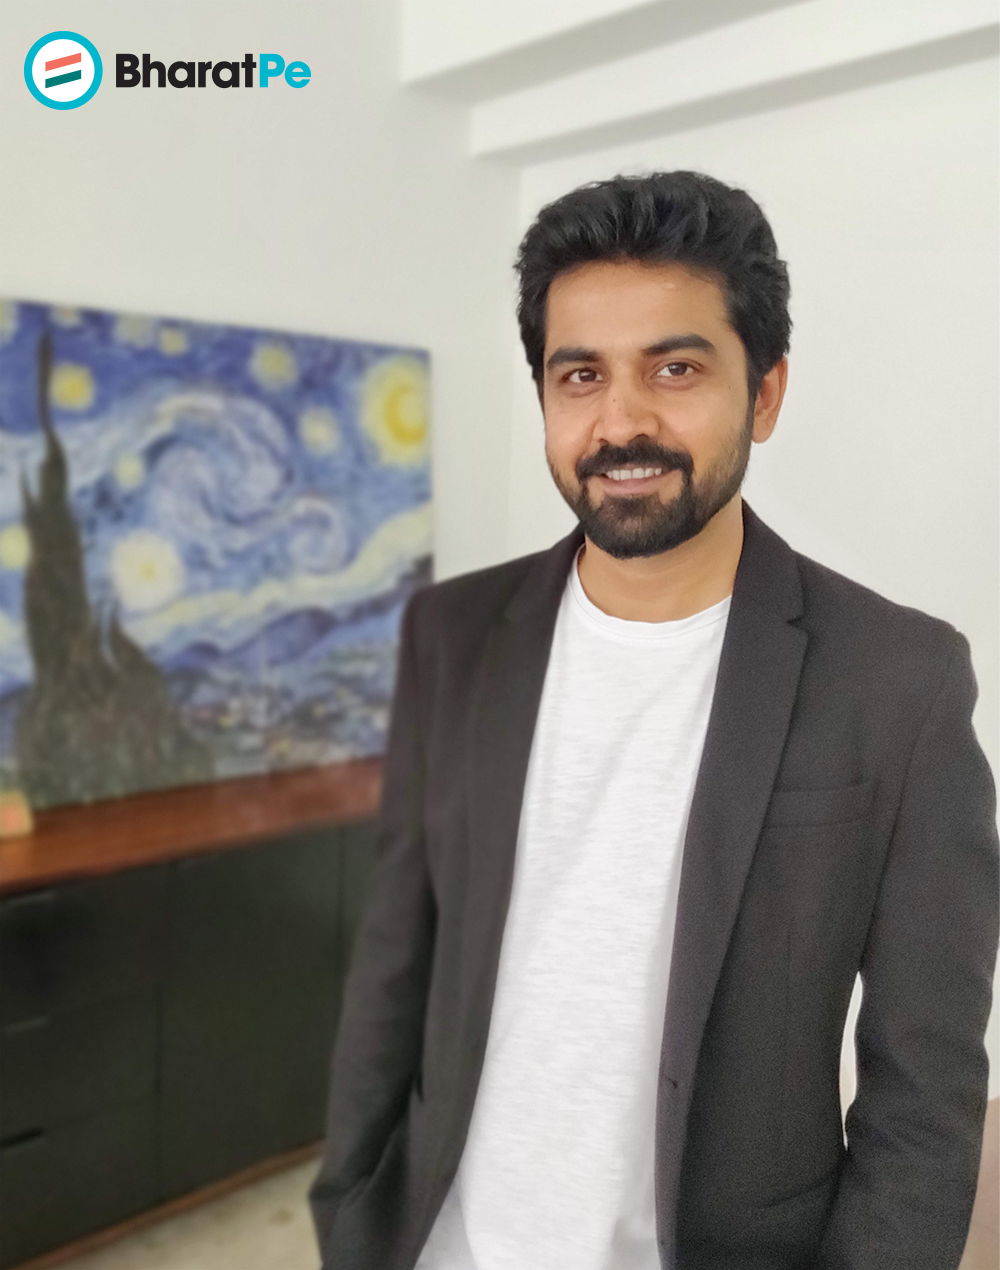 bharatpe-appoints-parth-joshi-as-chief-marketing-officer